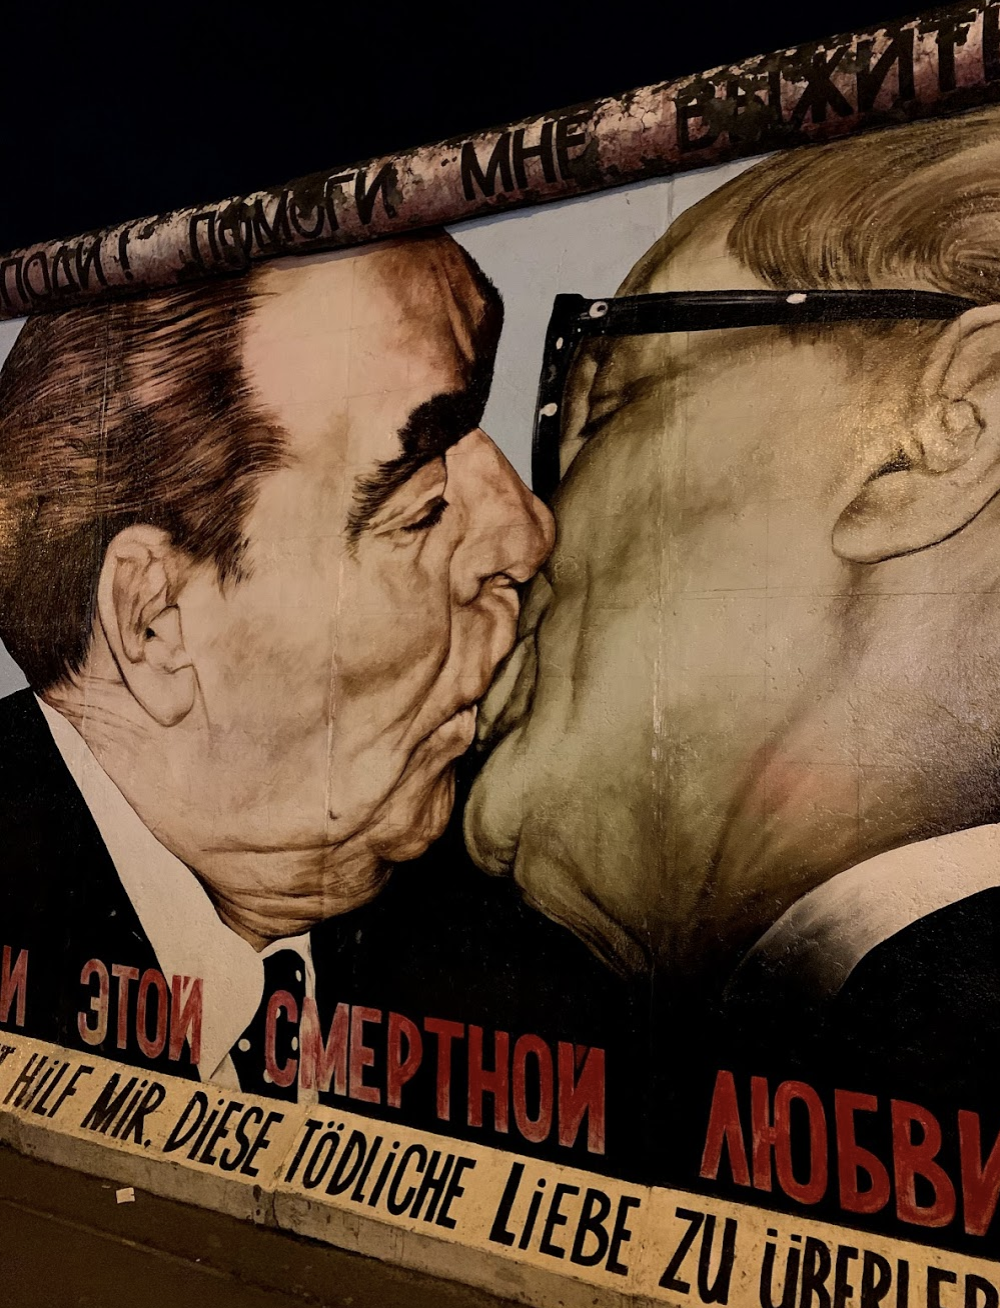 East Side Gallery at the Berlin Wall, Germany